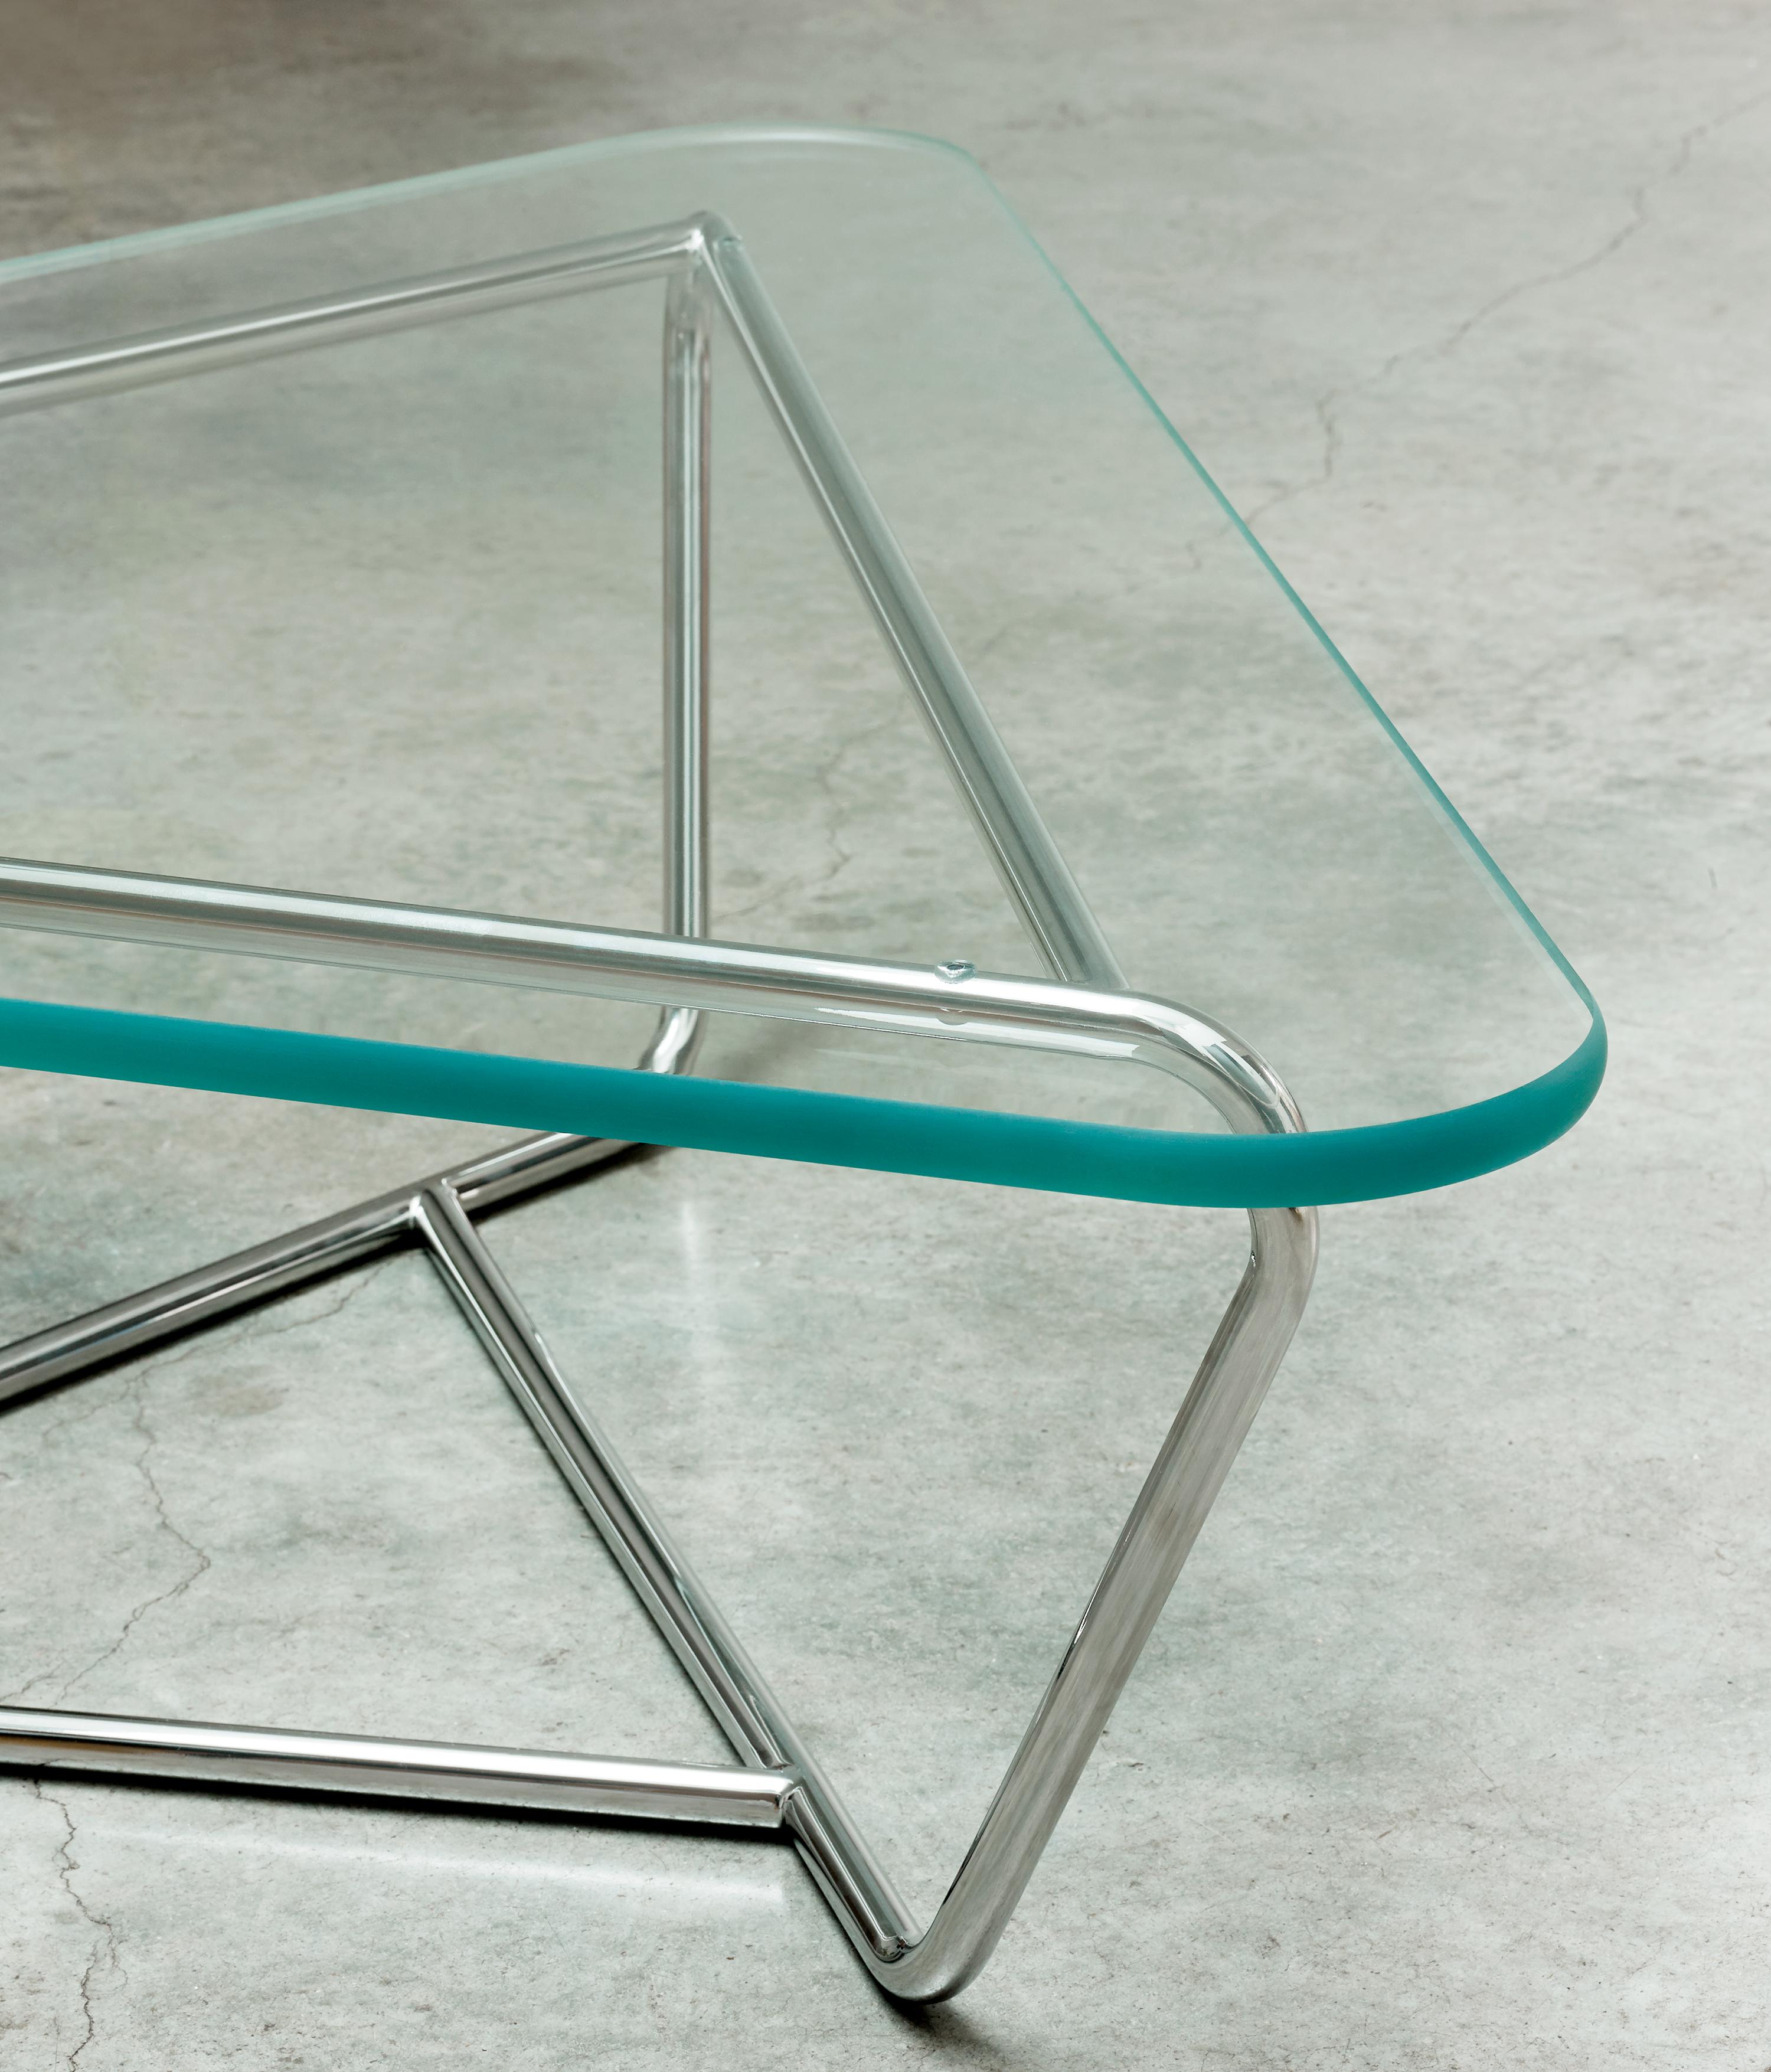 British Prism, Glass & Stainless Steel Contemporary Coffee Table by Made in Ratio For Sale